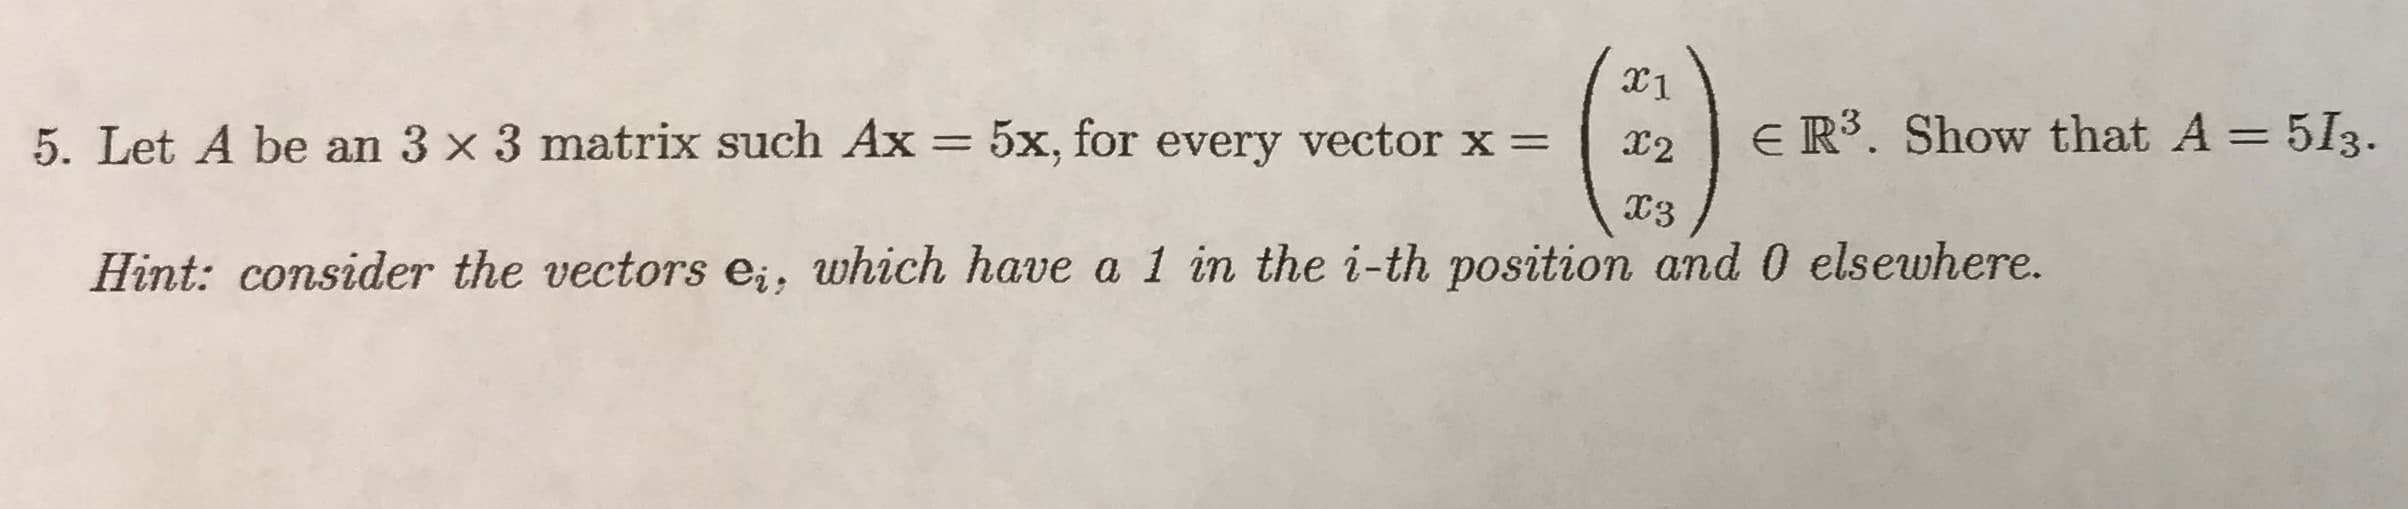 E R³. Show that A = 513.
%3D
X2
%3D
5. Let A be an 3 x 3 matrix such Ax = 5x, for every vector x =
13
Hint: consider the vectors e;, which have a 1 in the i-th position and 0 elsewhere.
